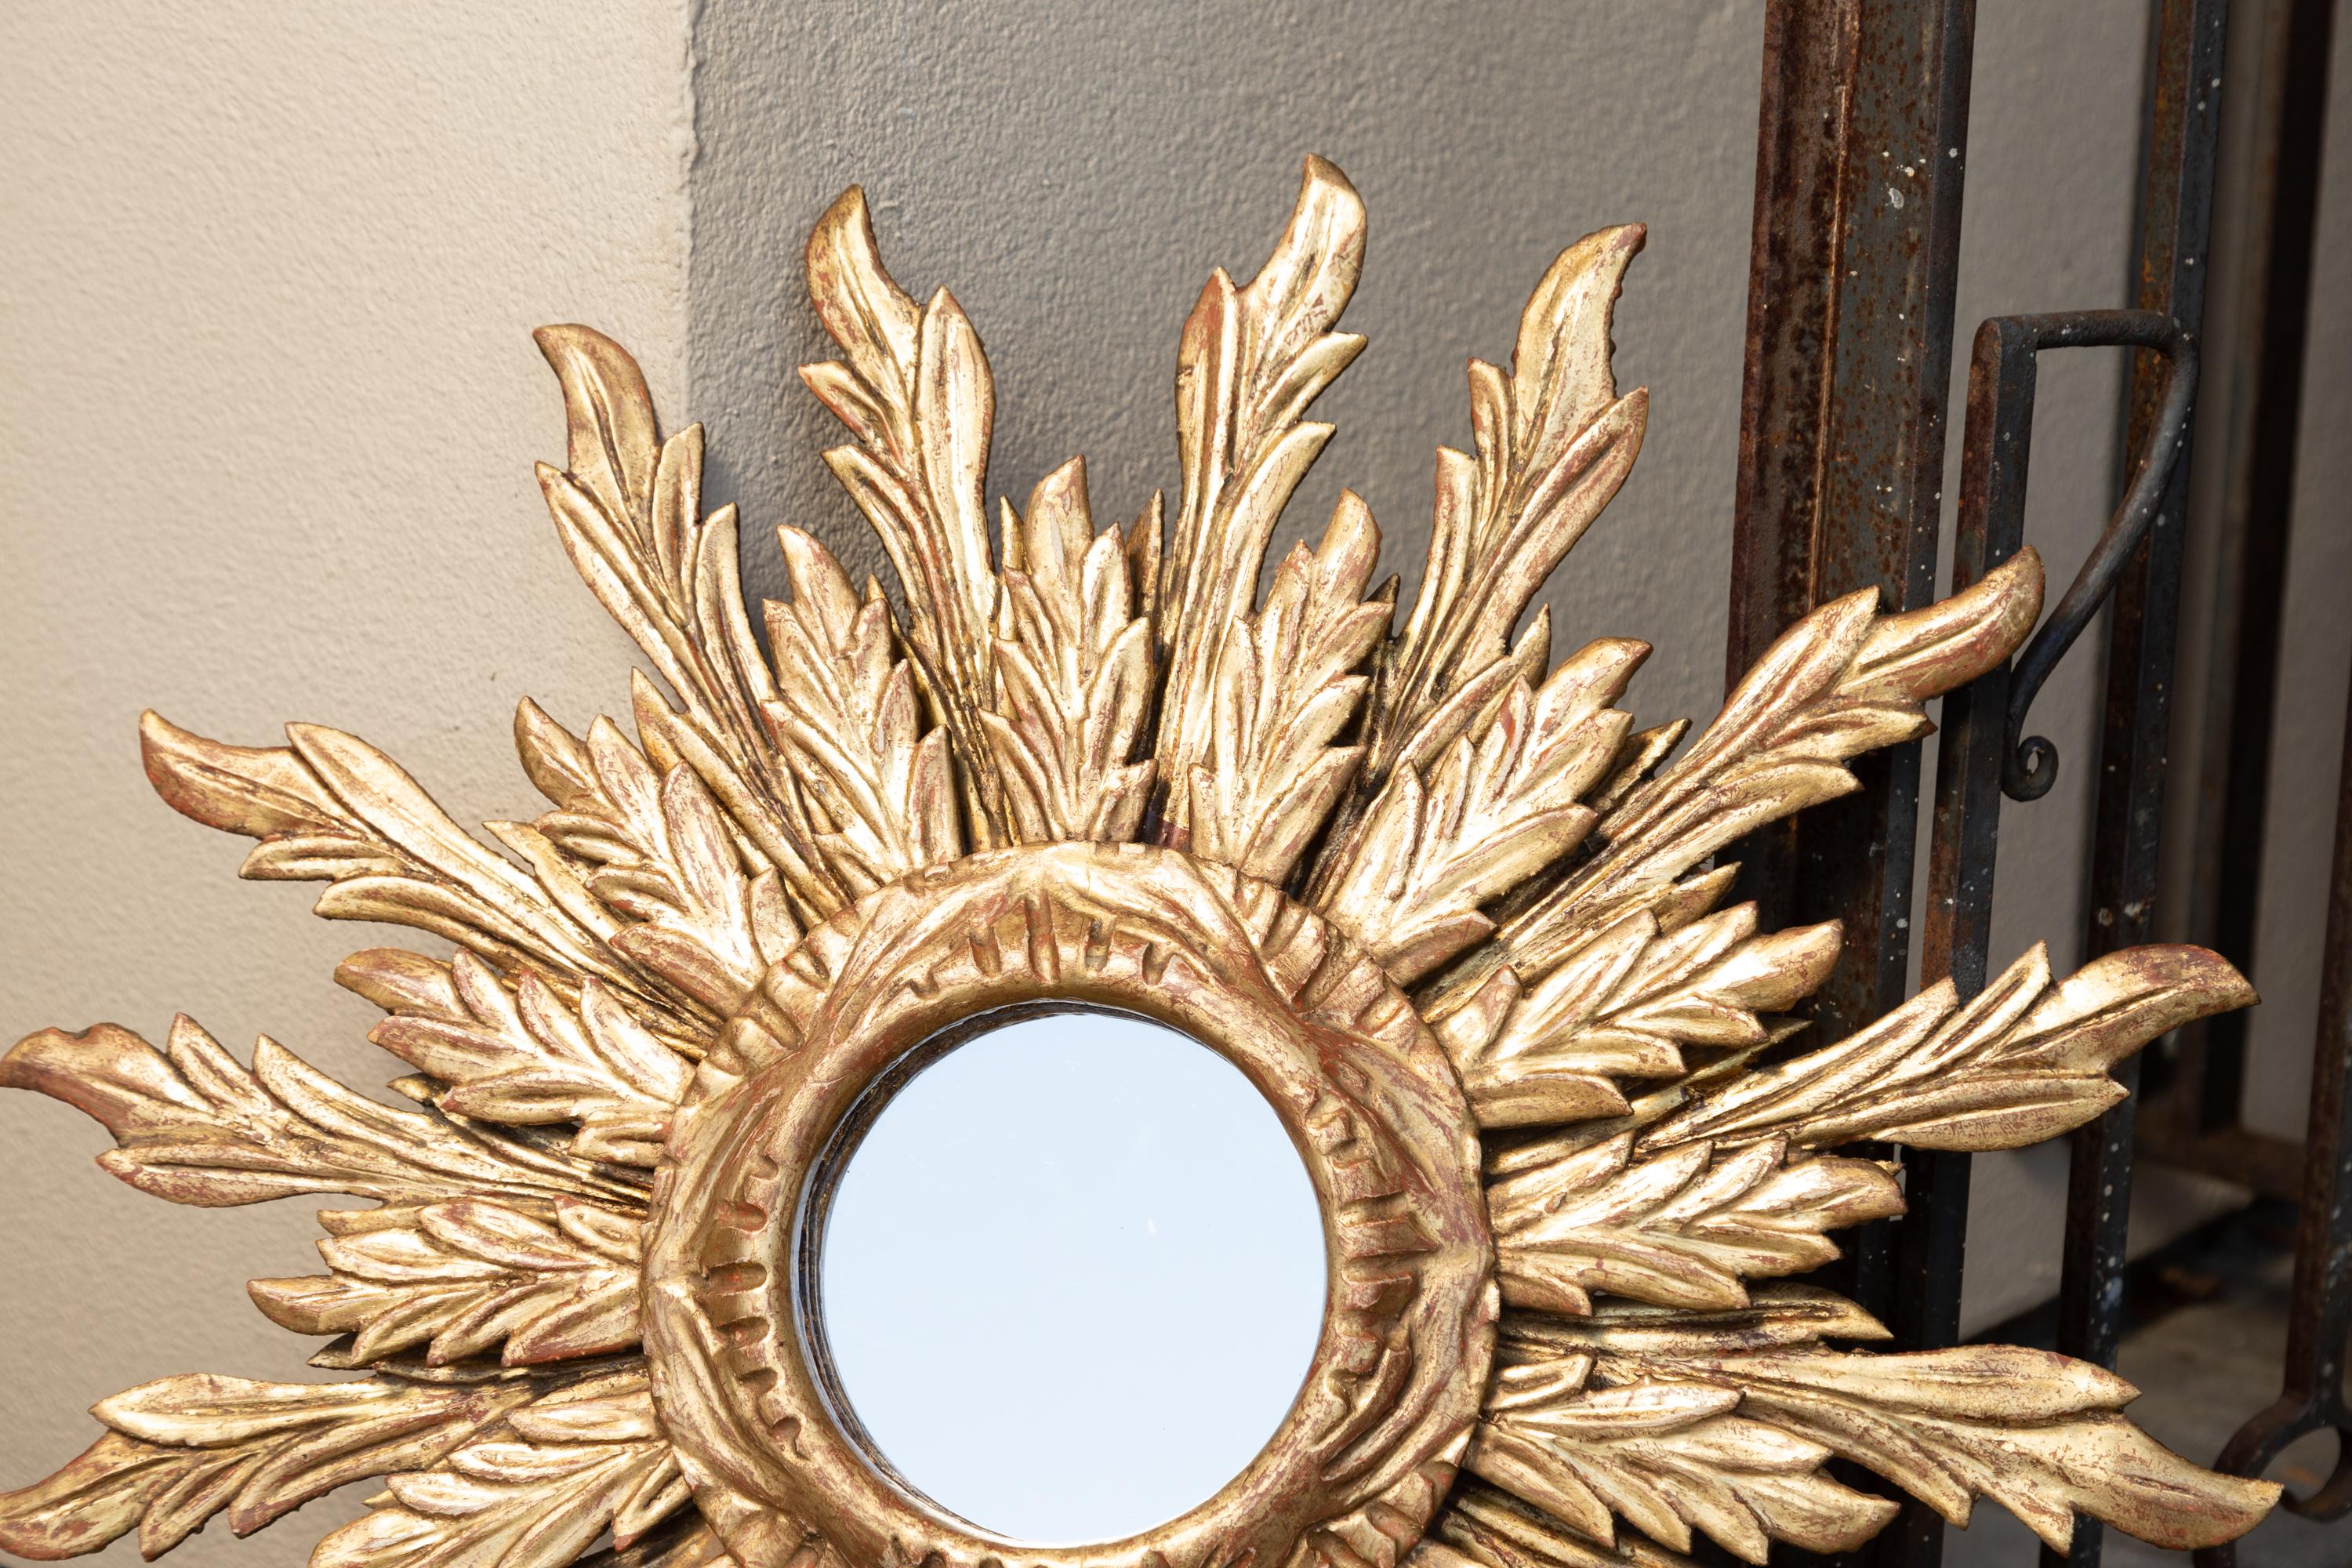 French Giltwood Sunburst Mirror with Wavy Sunrays from the Mid-20th Century For Sale 2